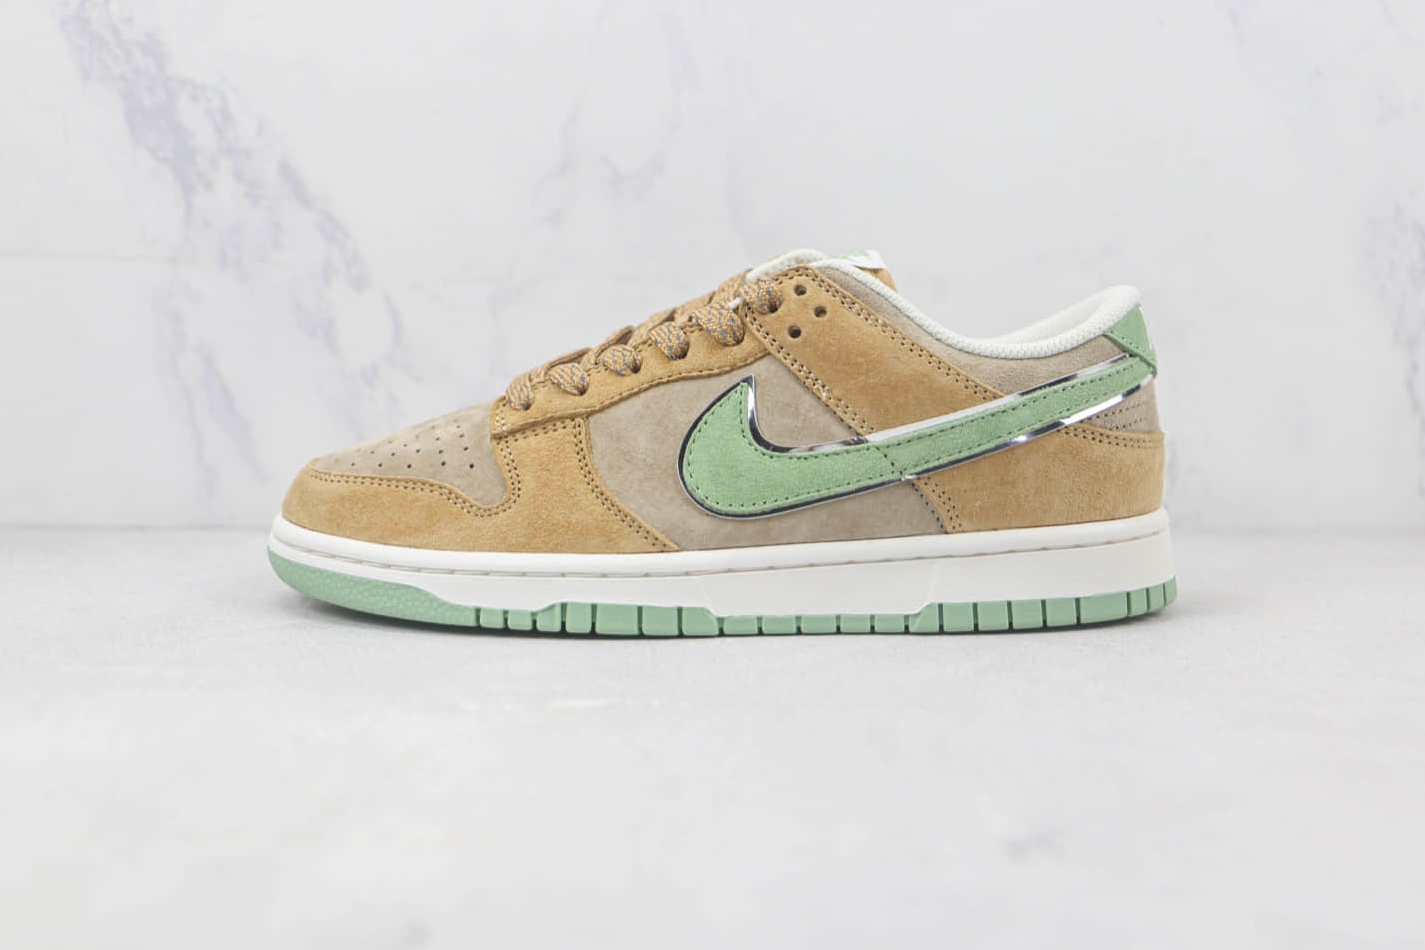 Otomo Katsuhiro x Nike SB Dunk Low Steamboy OST Brown Green Sliver ST1391-202 - Limited Edition Skate Shoes